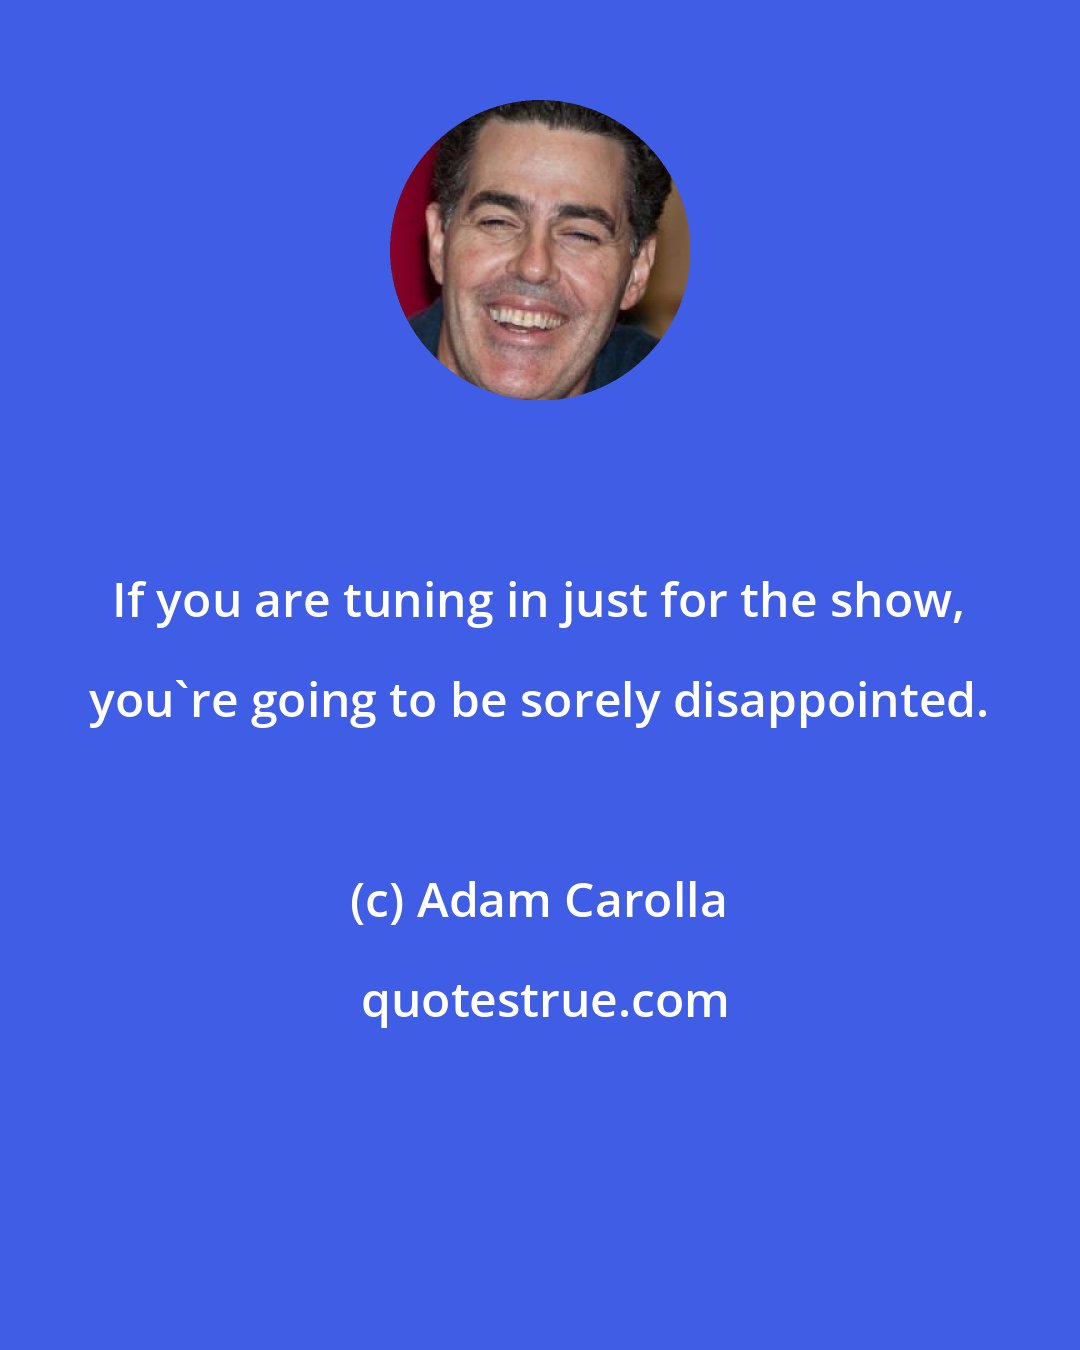 Adam Carolla: If you are tuning in just for the show, you're going to be sorely disappointed.